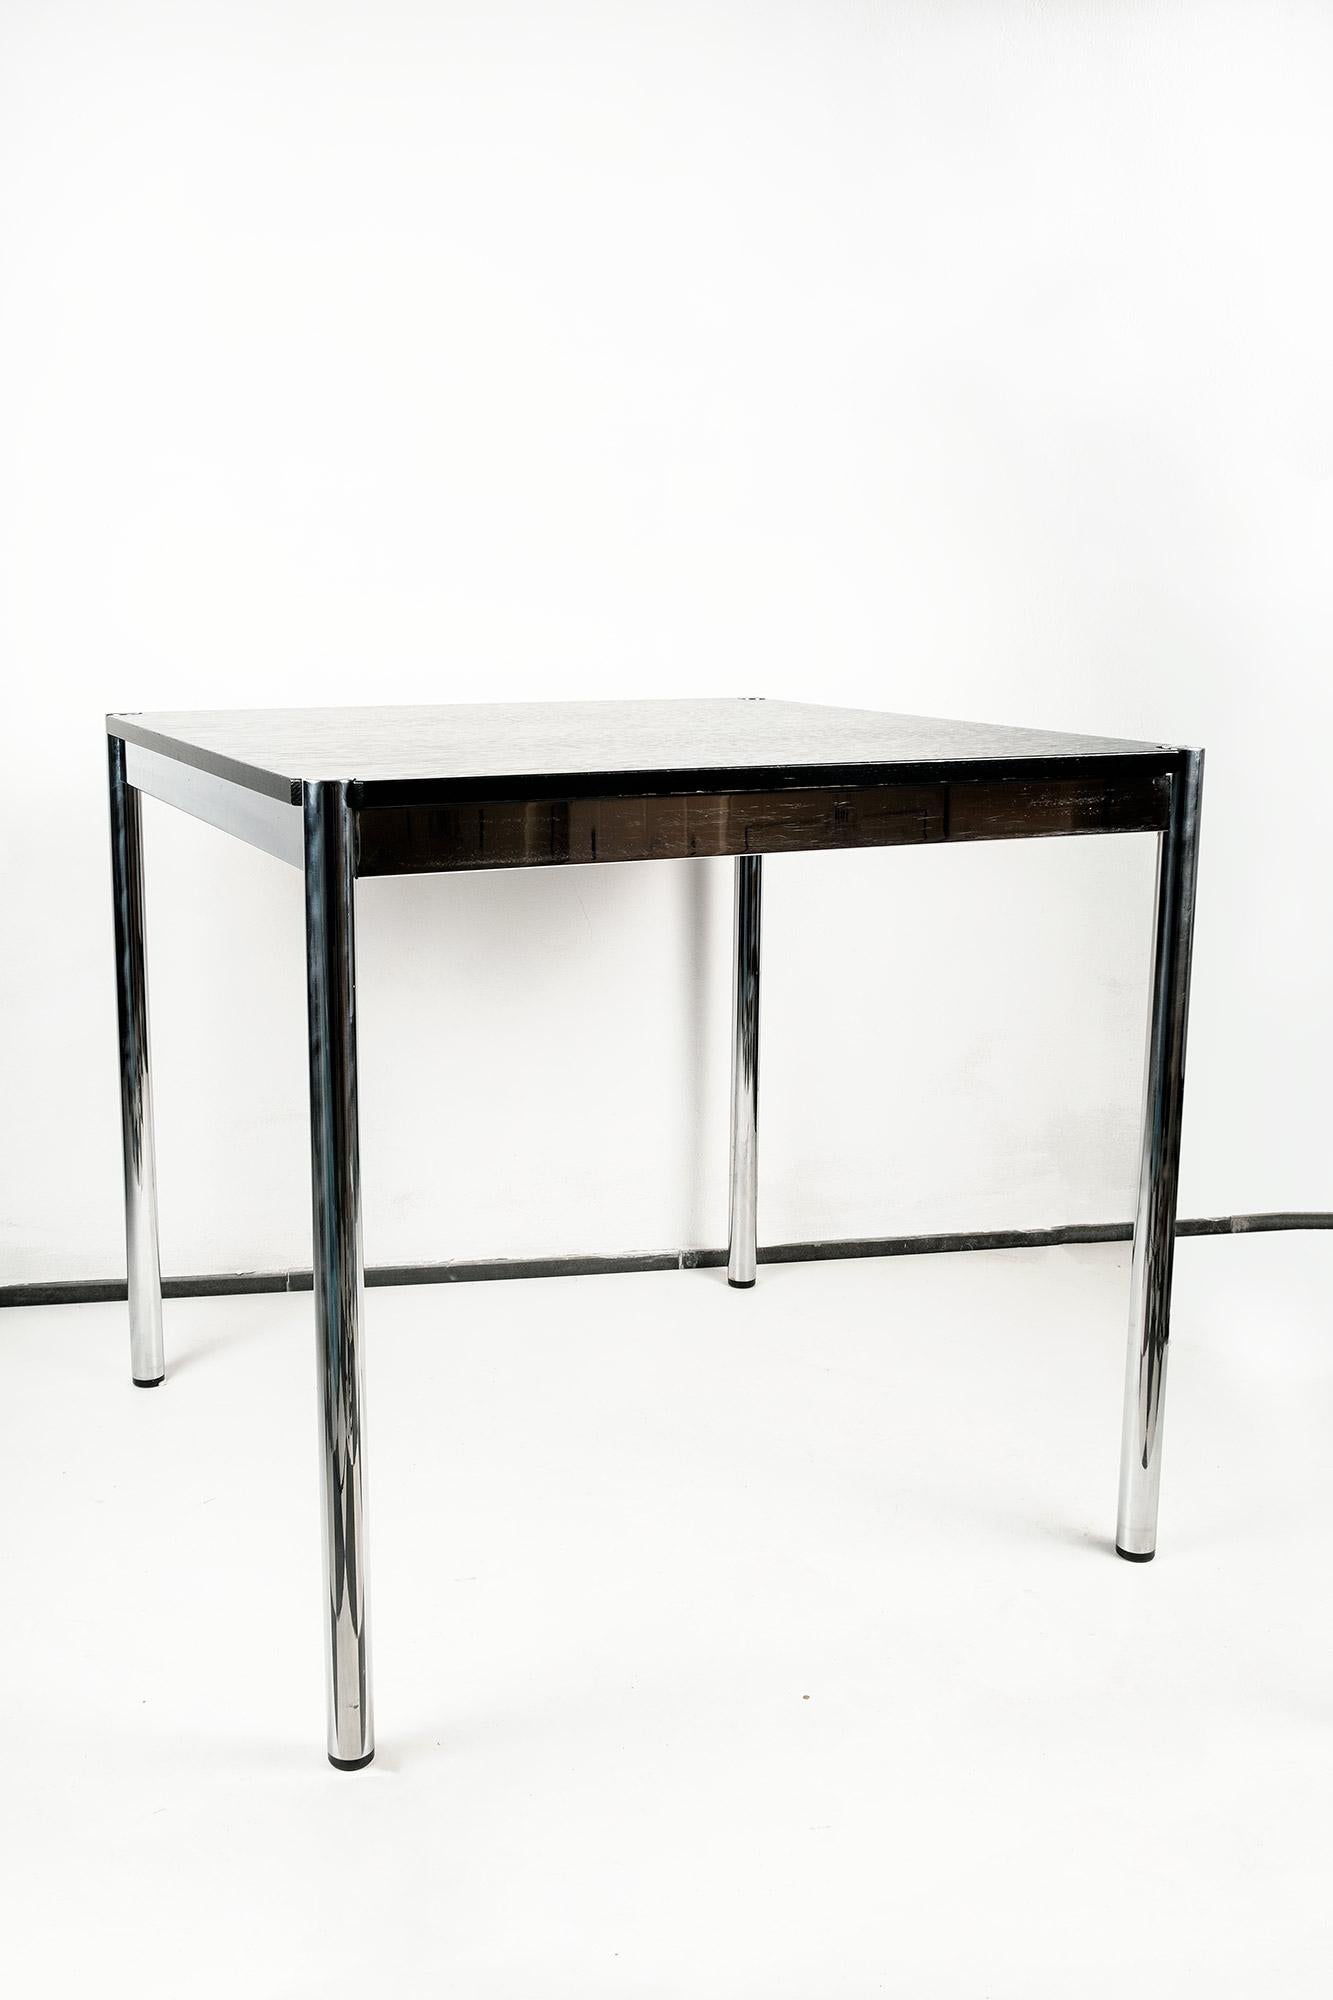 Beautiful design classic, square table by USM Haller of Switzerland. Chromed steel legs, black lacquered oak top. High quality workmanship from Switzerland. Original label